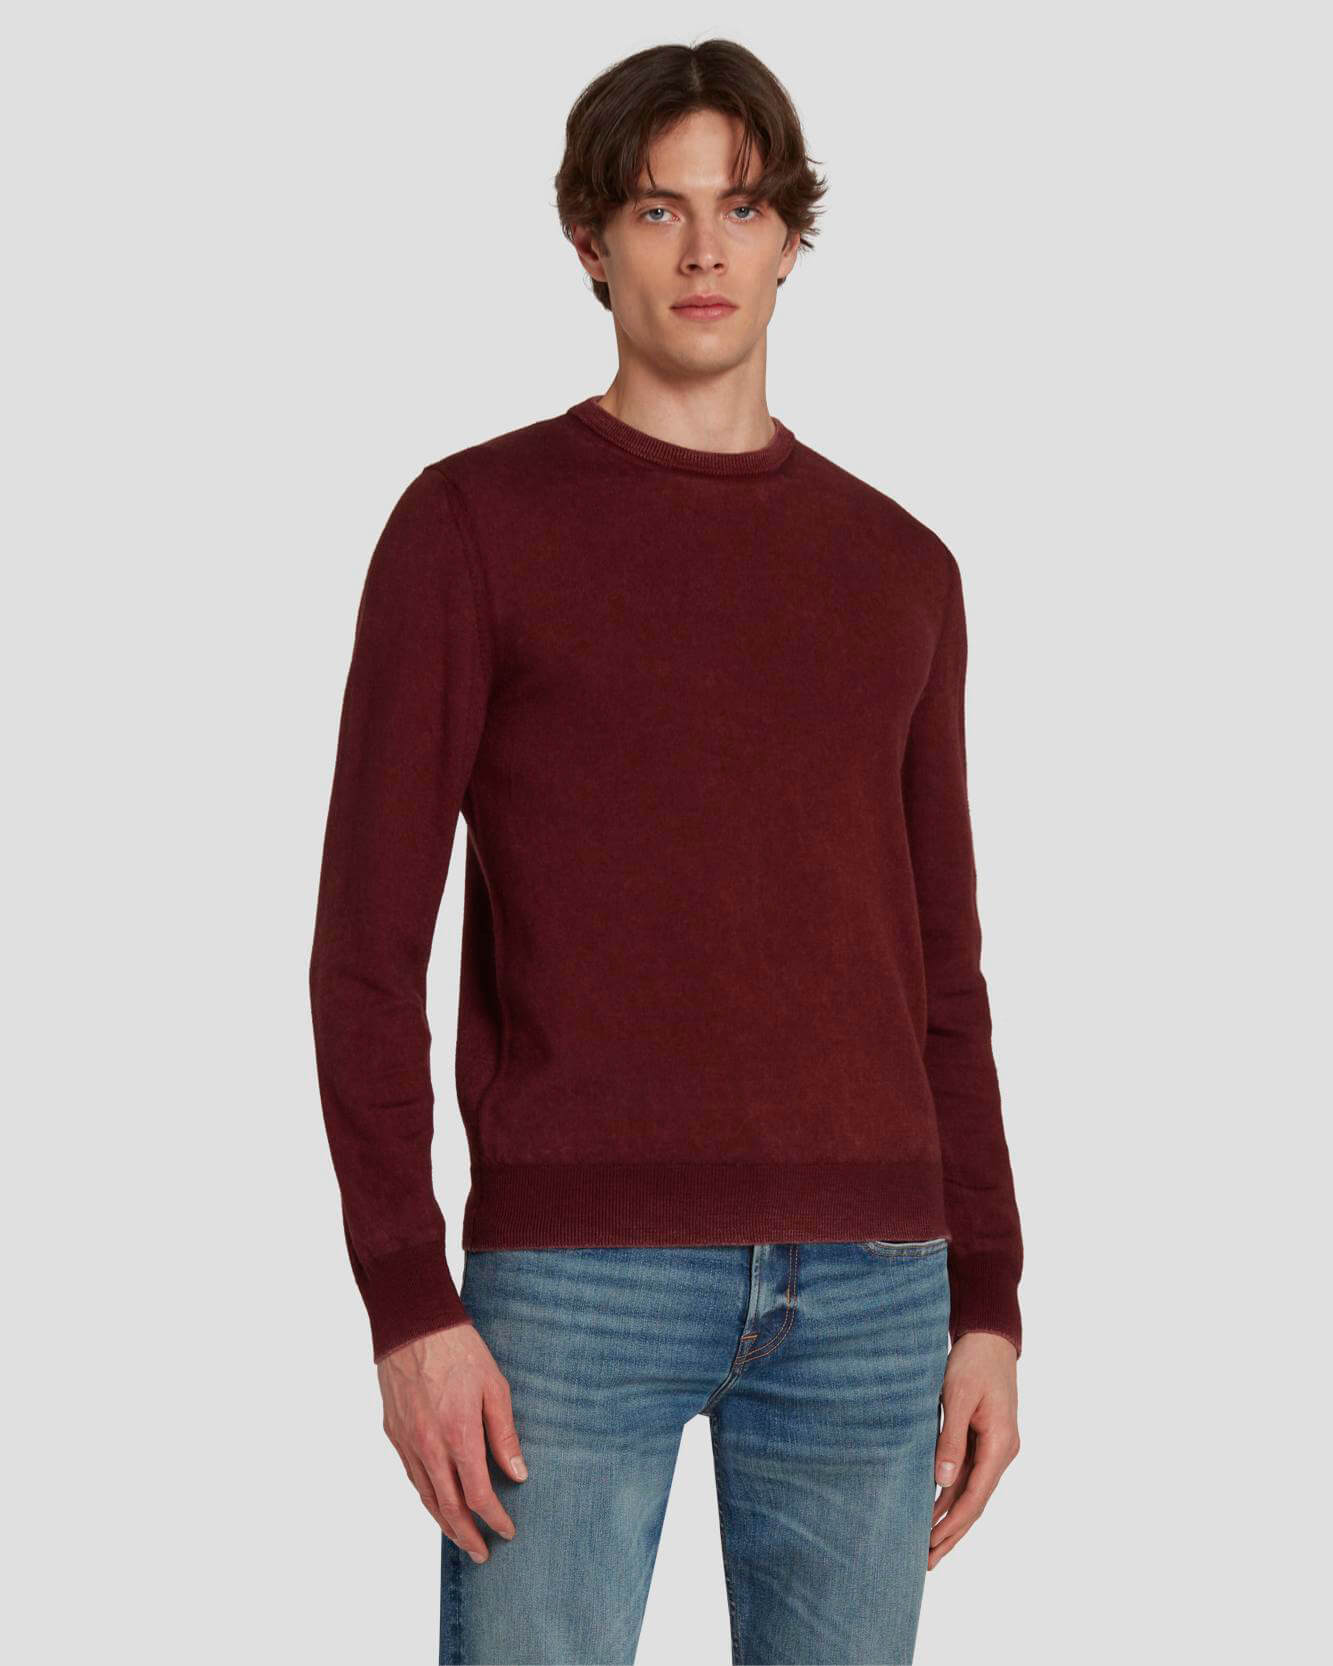 7 For All Mankind Merino Wool Sweater in Mulberry 7M001M16MBY